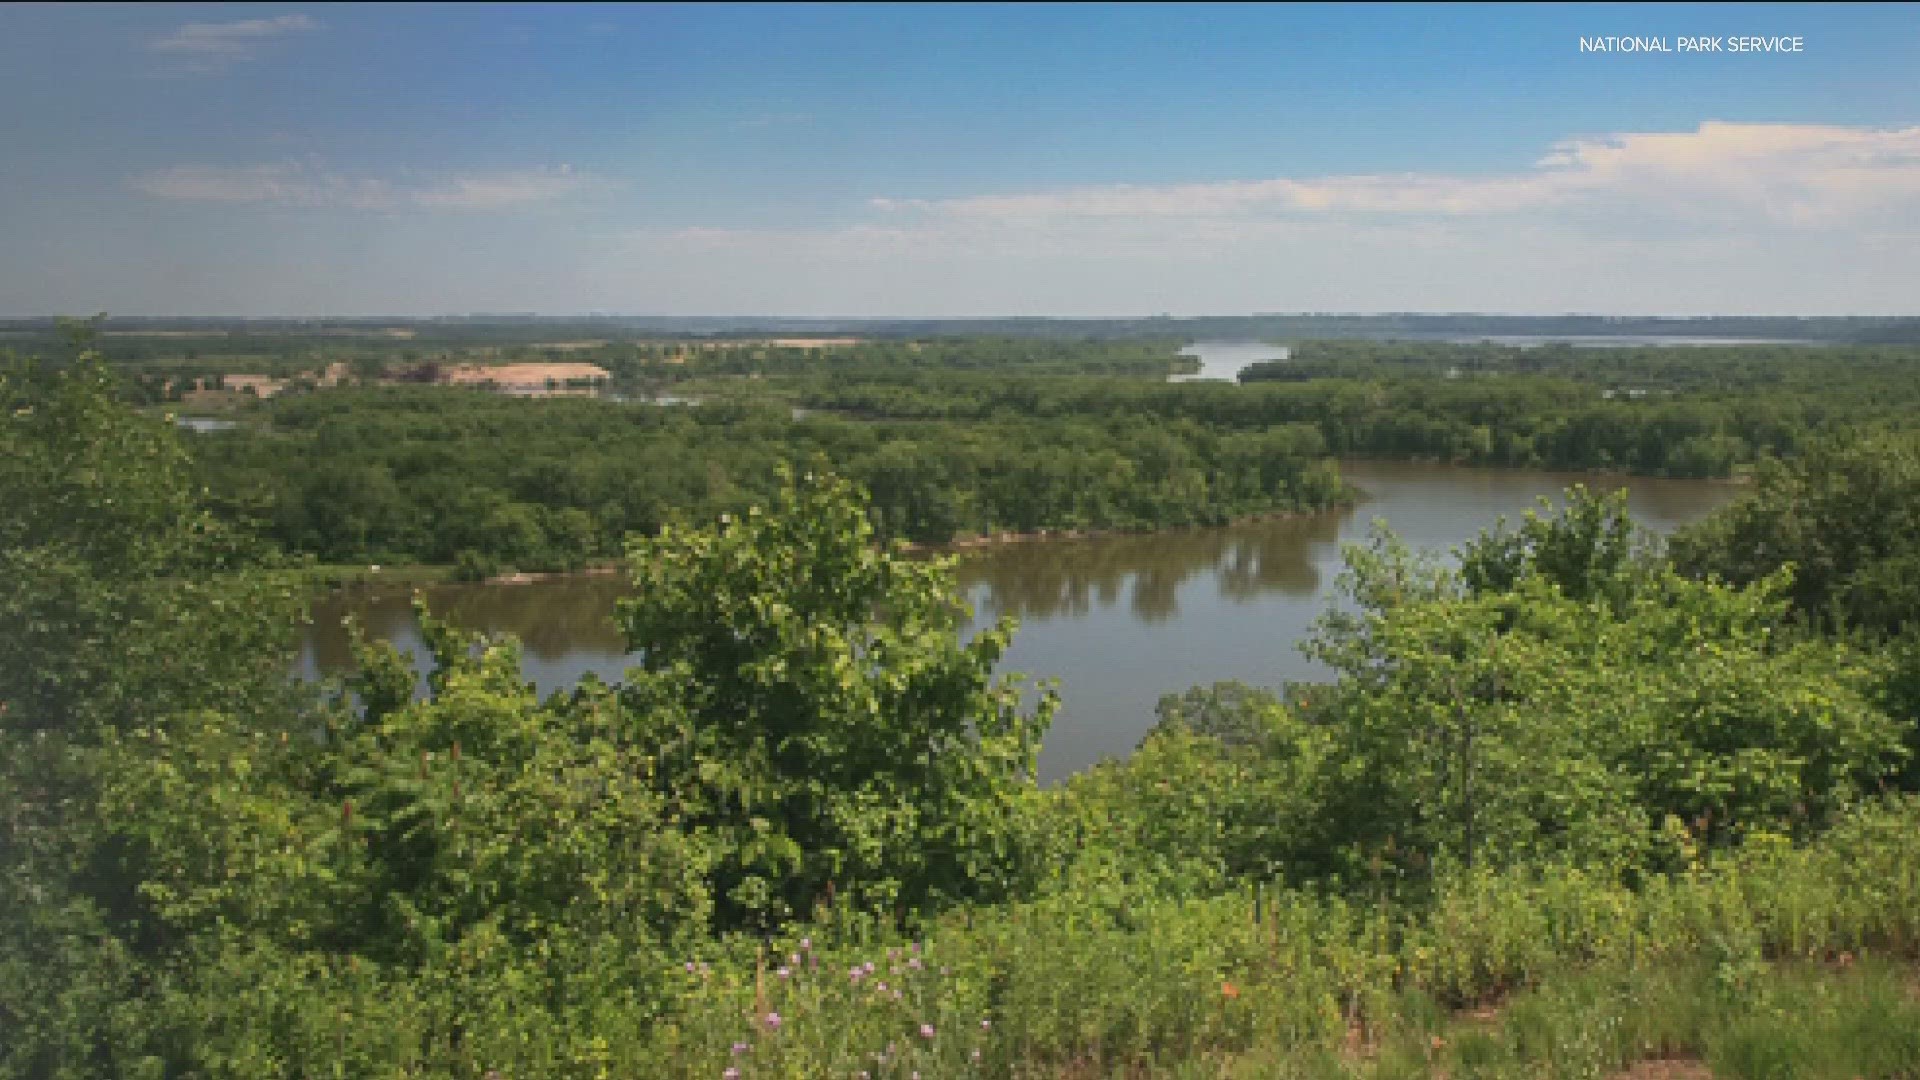 The federal government announced it would give $850,000 toward Dakota County's Mississippi River greenway to help improve ongoing projects along the corridor.